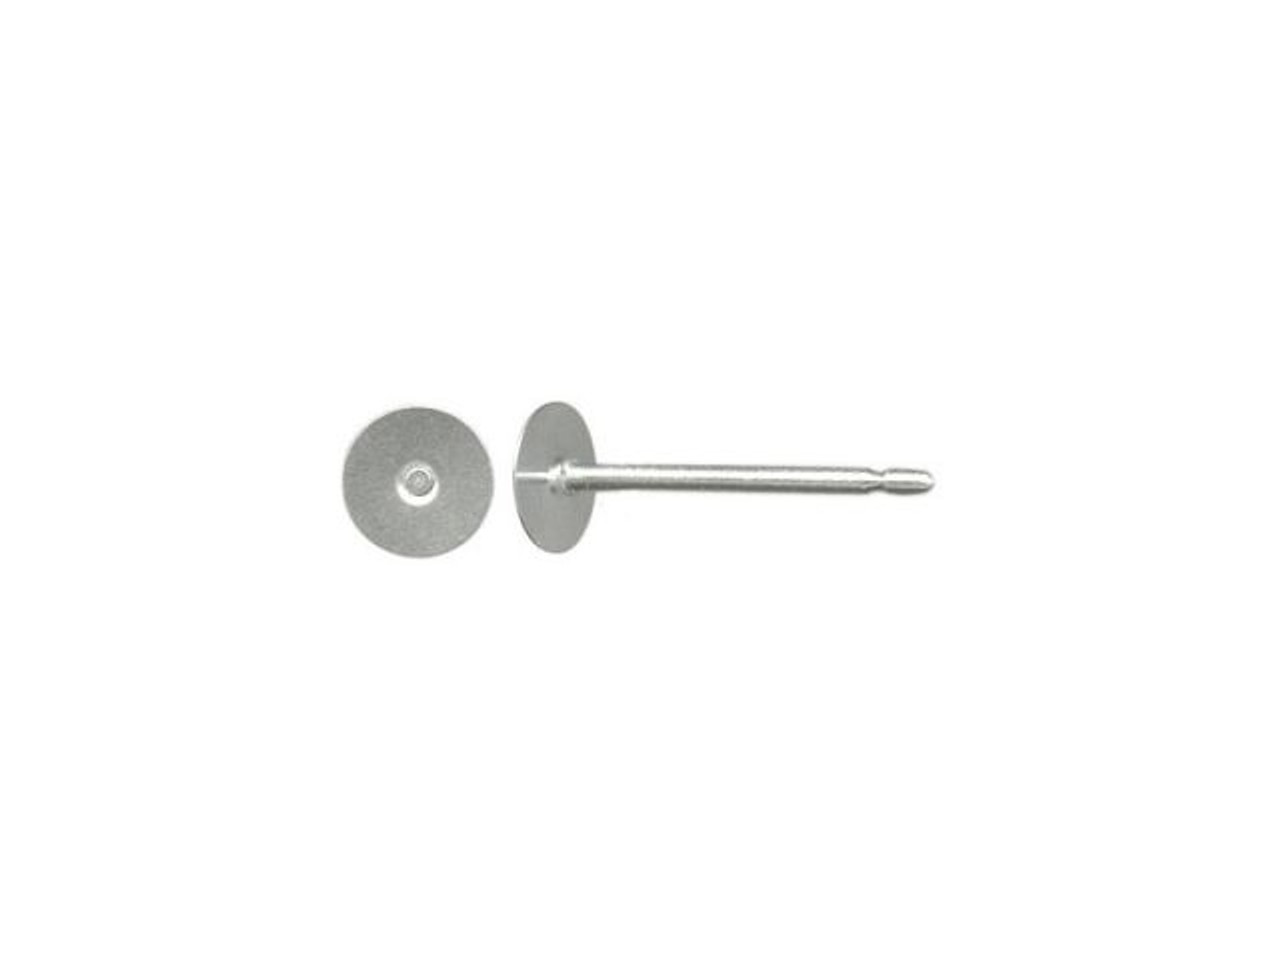 Titanium Earring 11mm Post with 4mm Stainless Steel Flat Pad